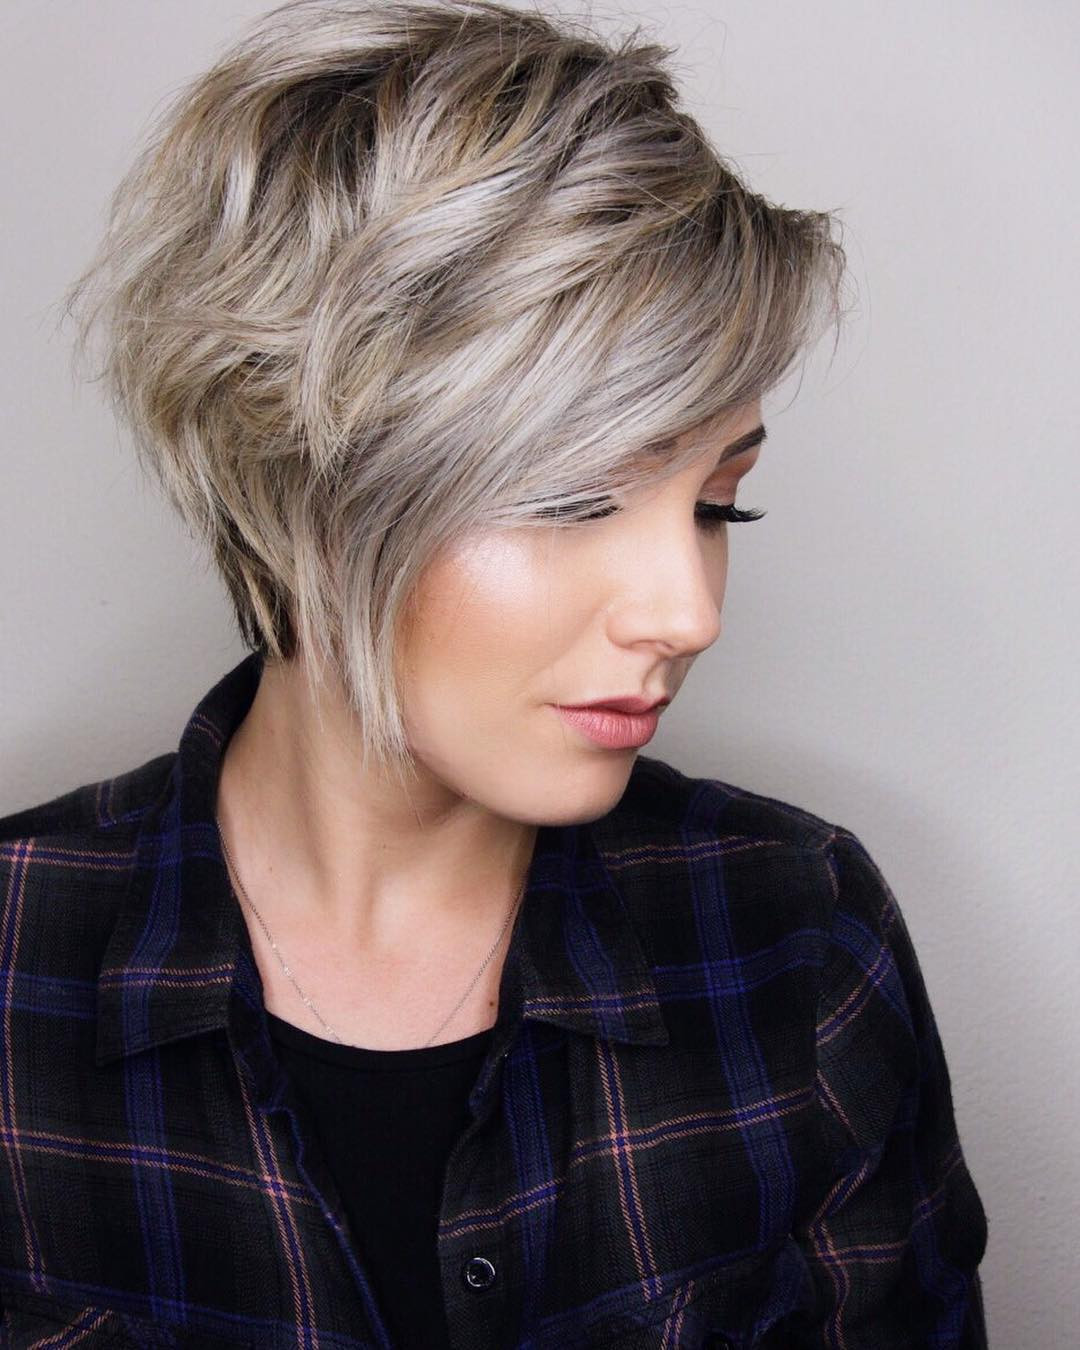 Short Haircuts For Women Thick Hair
 10 Trendy Layered Short Haircut Ideas 2020 Extra